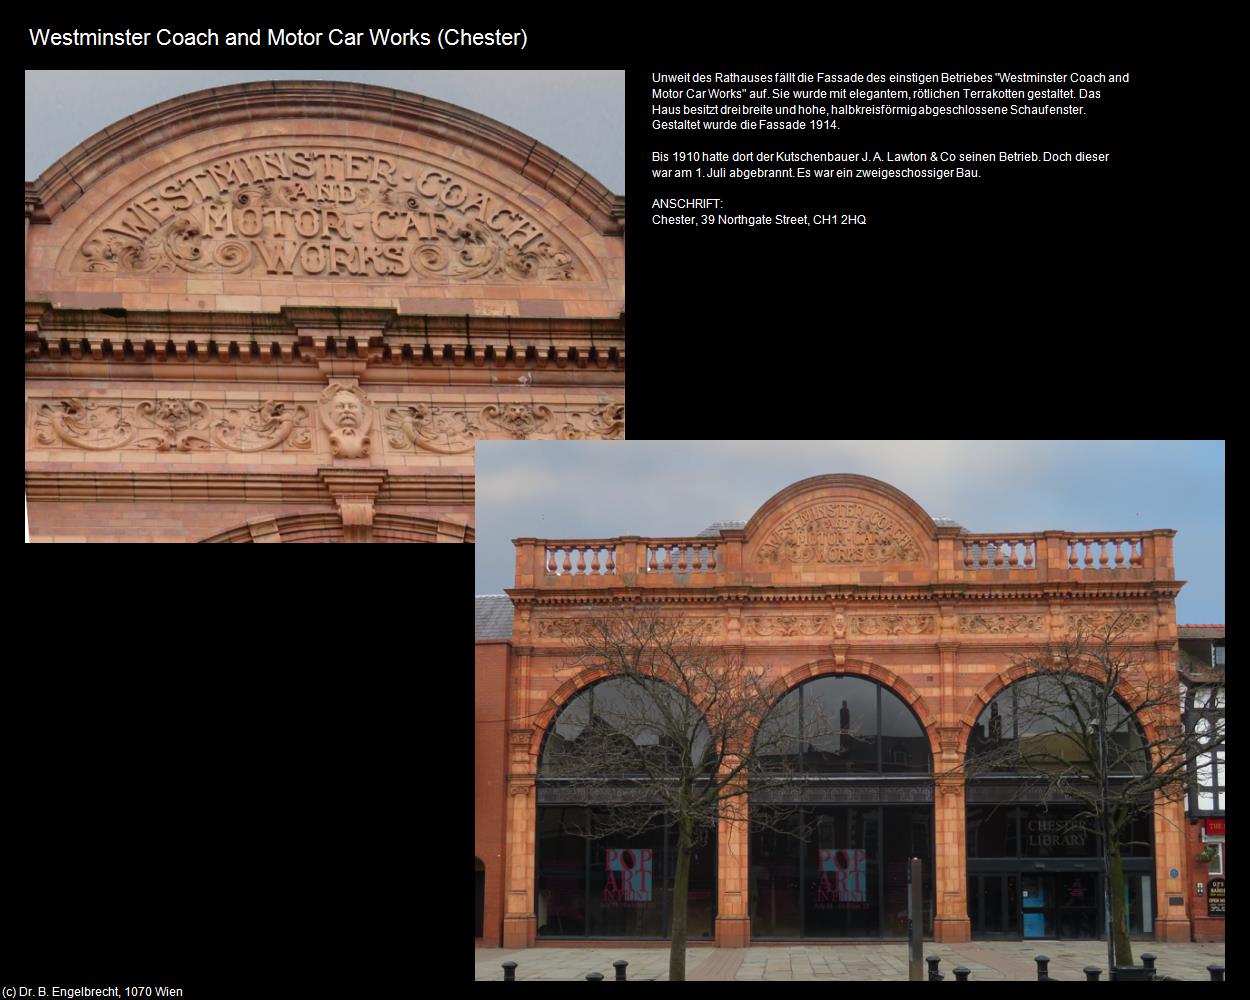 Westminster Coach and Motor Car Works  (Chester, England) in Kulturatlas-ENGLAND und WALES